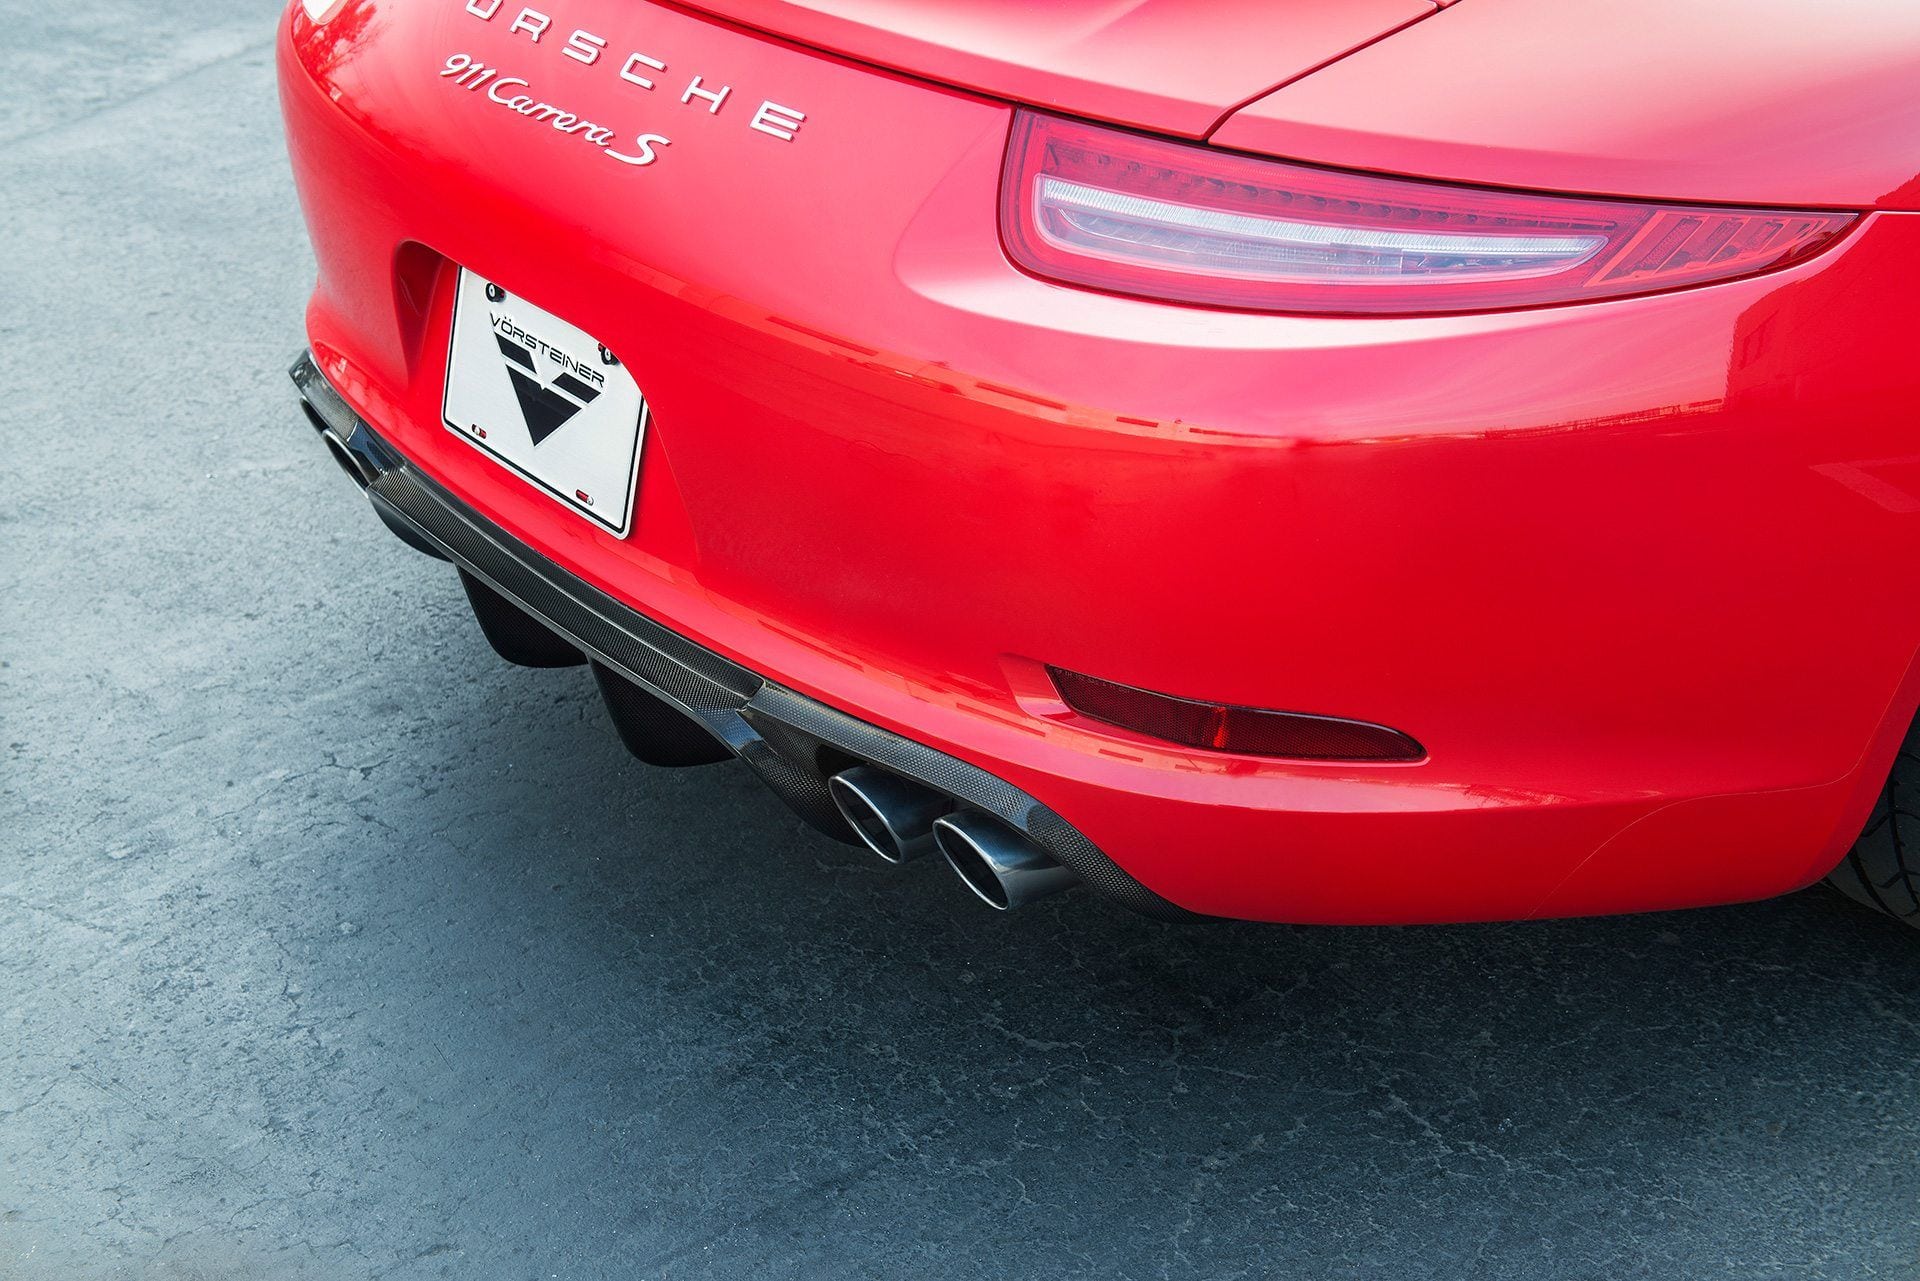 Exterior Body Parts - Supreme Power | Vorsteiner 991.1 Rear Diffuser GROUP BUY! Up to $500 savings! - 2012 to 2016 Porsche 911 - Fullerton, CA 92831, United States